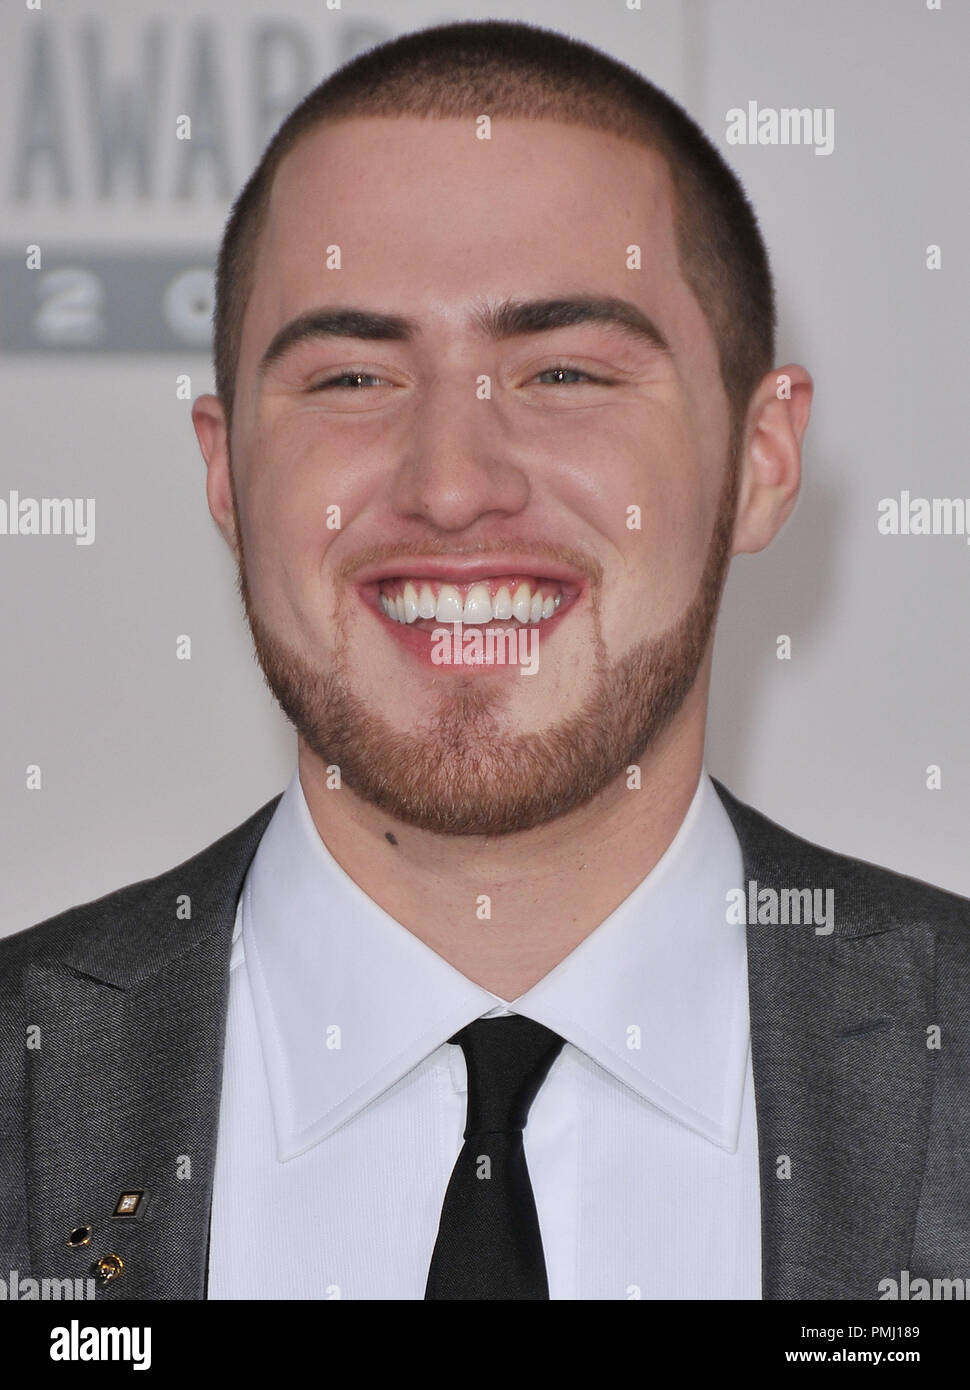 Mike Posner at the 2010 American Music Awards - Arrivals held at the ...